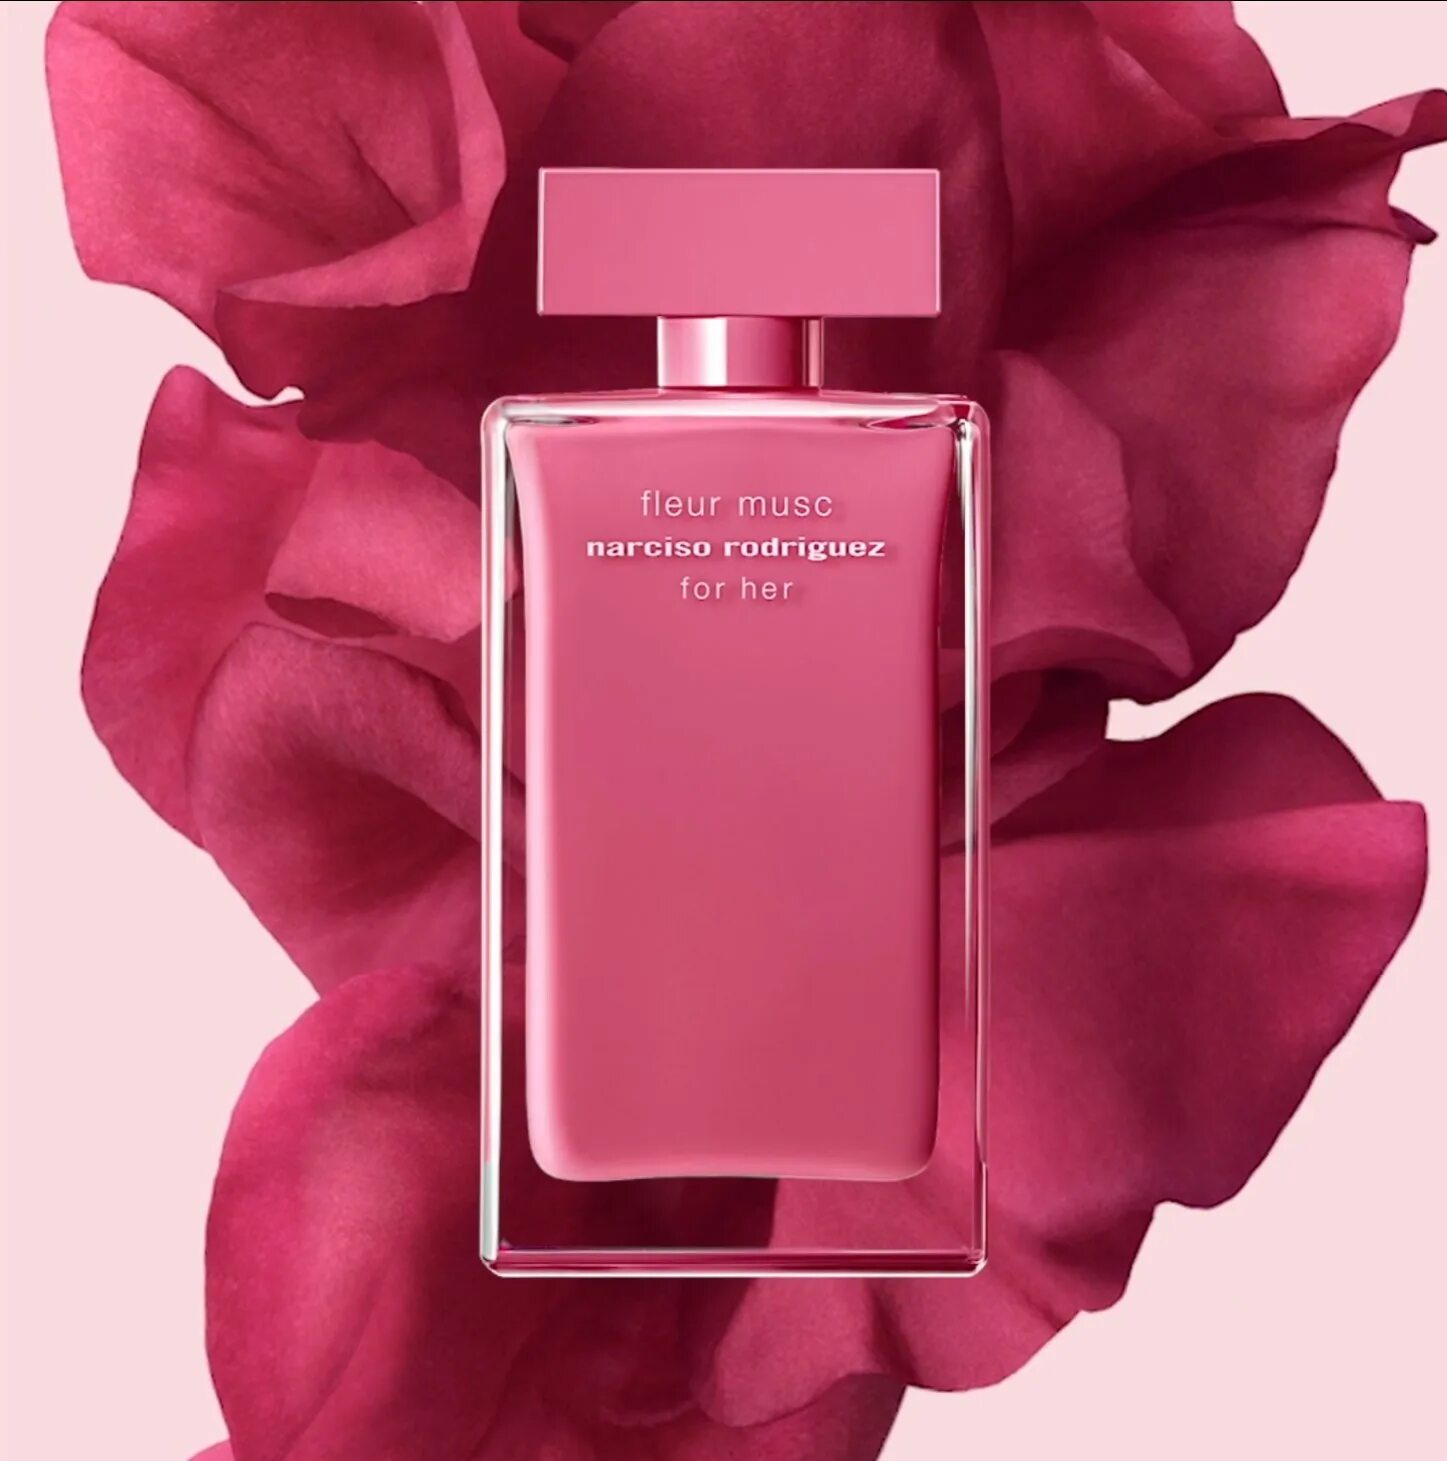 Narciso Rodriguez fleur Musc for her Parfum. Narciso Rodriguez Musc. Fleur Musc Narciso Rodriguez for her. Narciso Rodriguez fleur Musc for her EDT, 100 ml (Luxe евро). Родригес флер